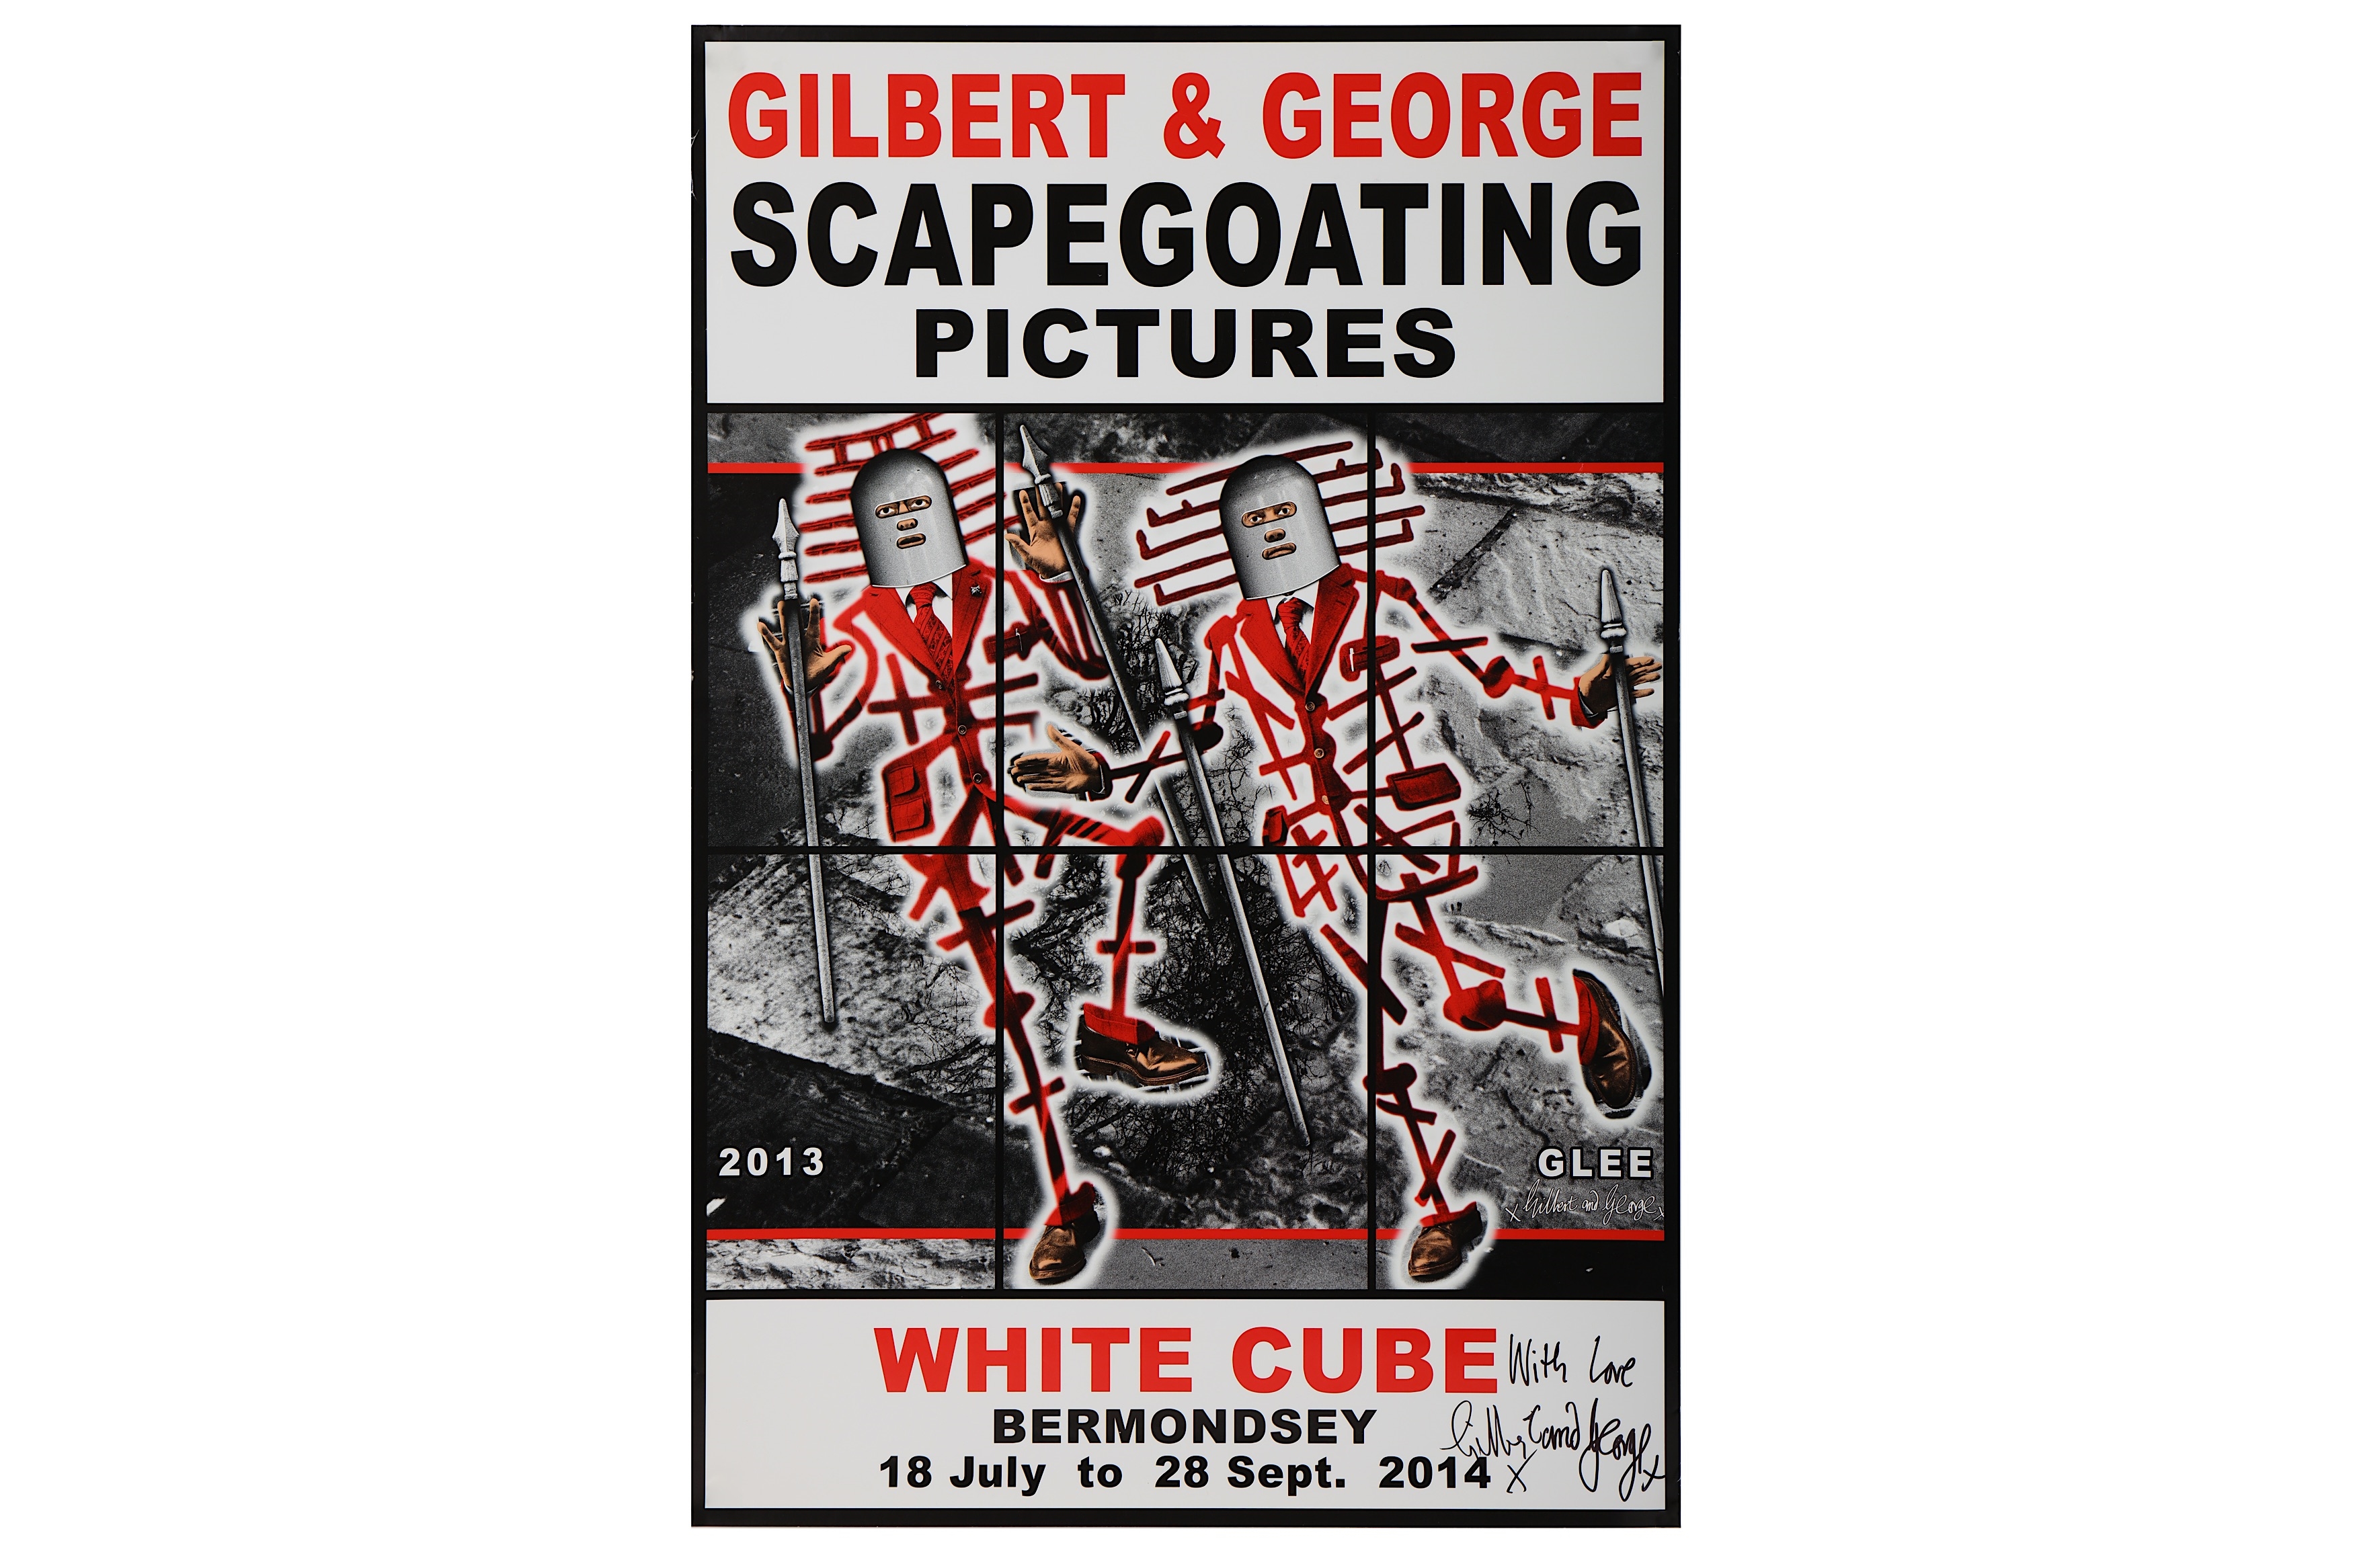 'Scapegoating Pictures' by Gilbert & George, 2014